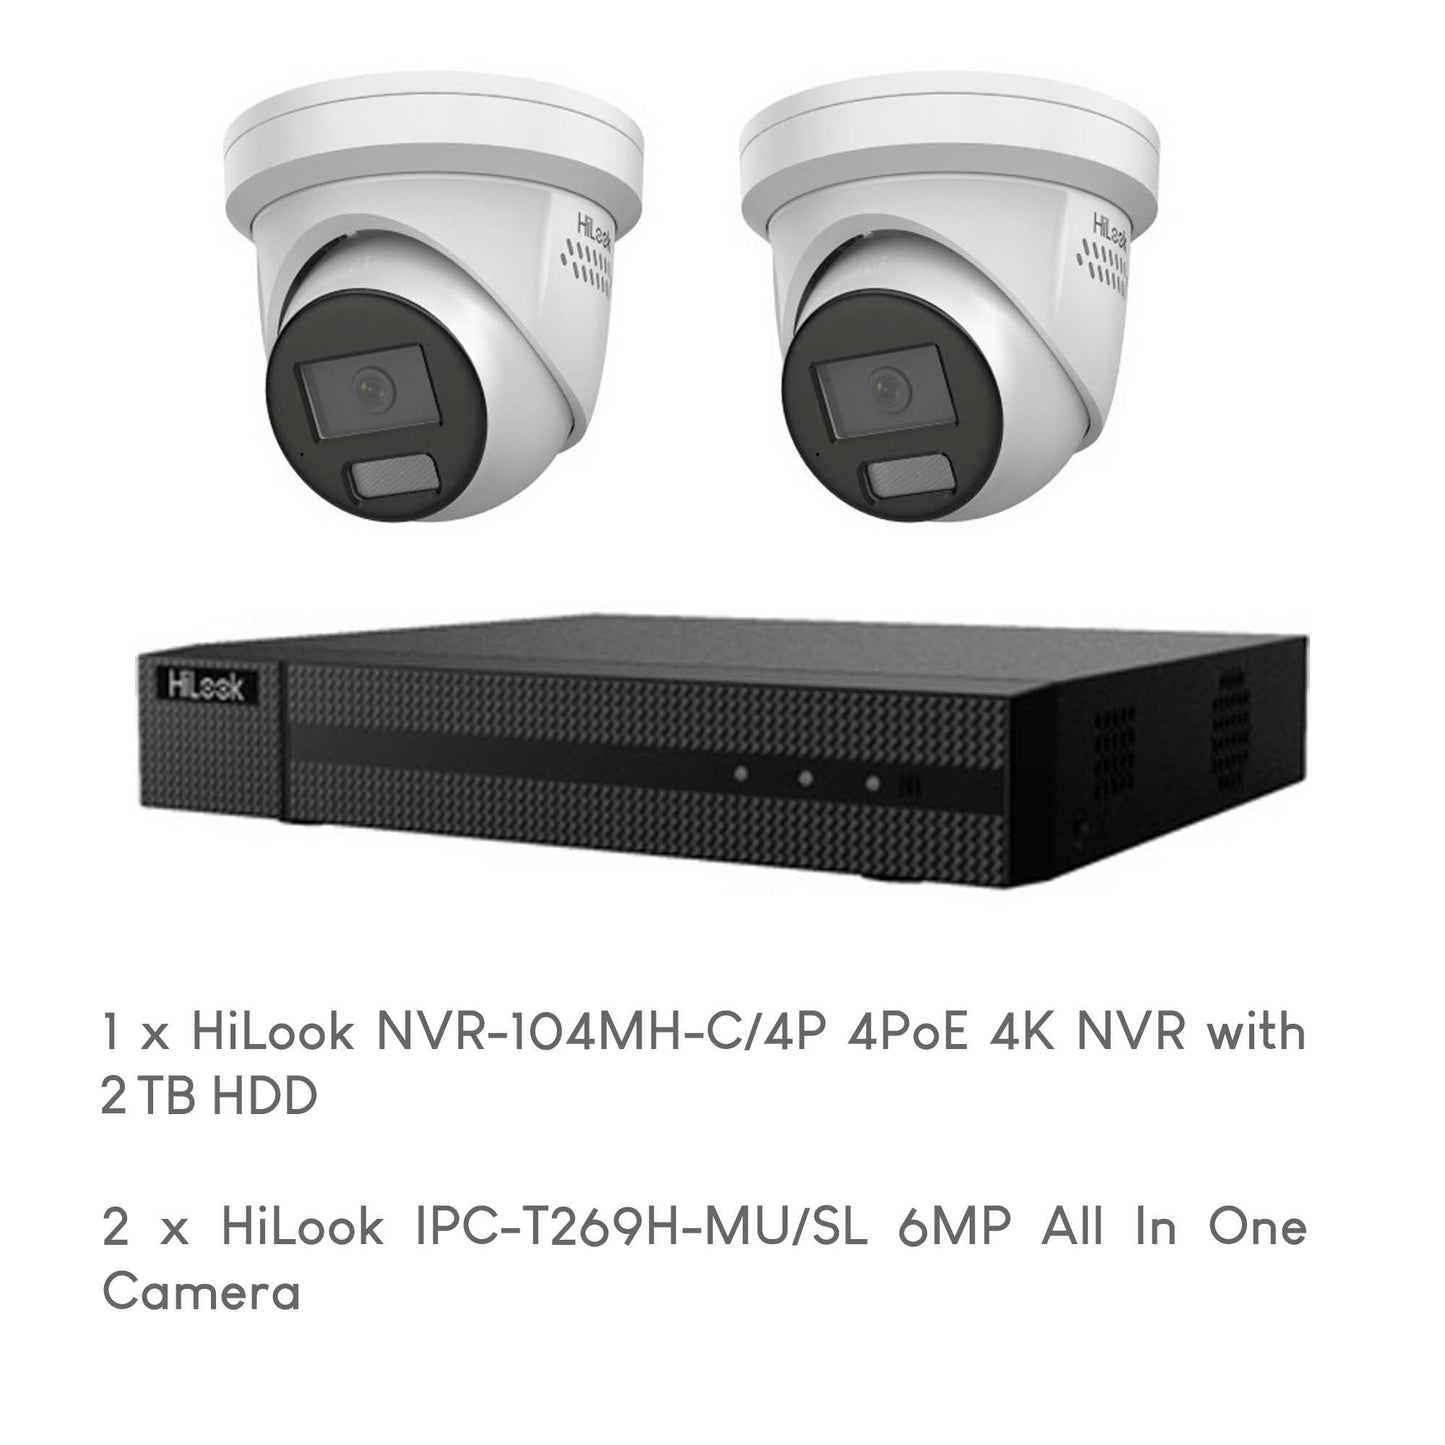 HiLook 2-Camera 6MP CCTV Package with Installation by 5 Star Security